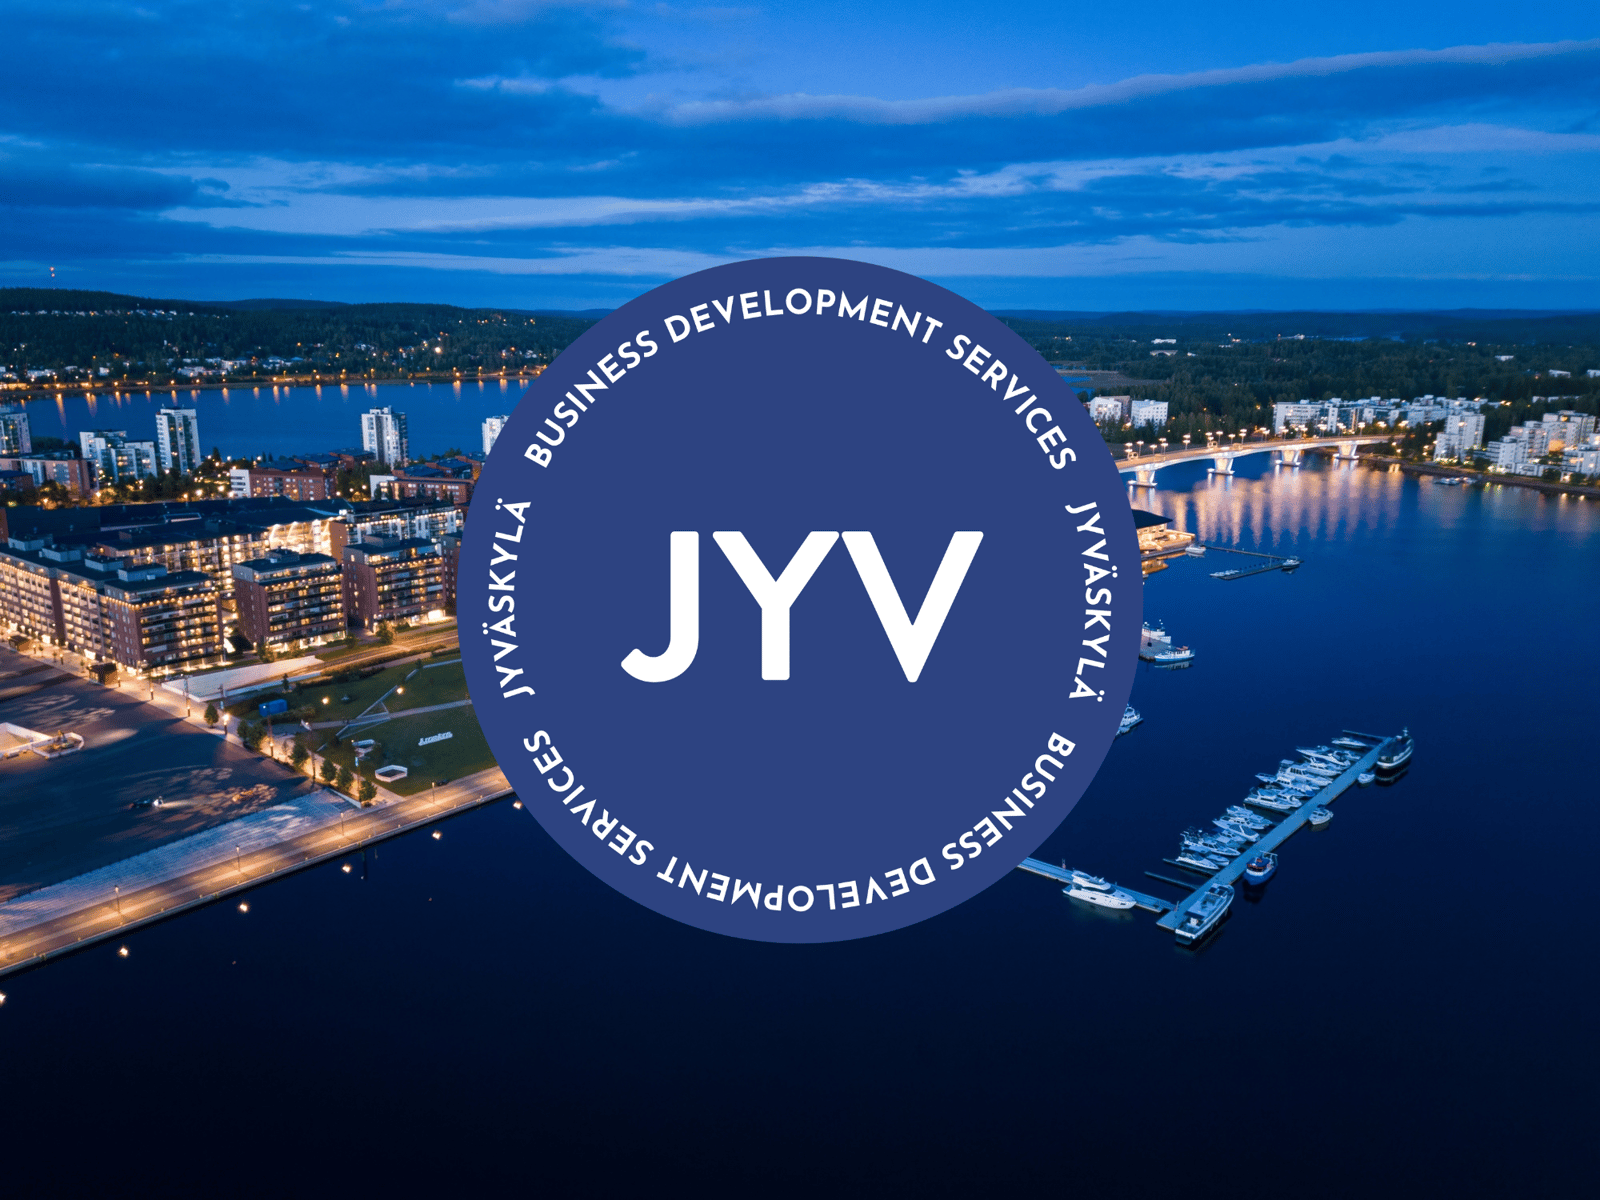 The City of Jyväskylä will discontinue the use of Business Jyväskylä brand – in the future, the service area will be called Business Development Services